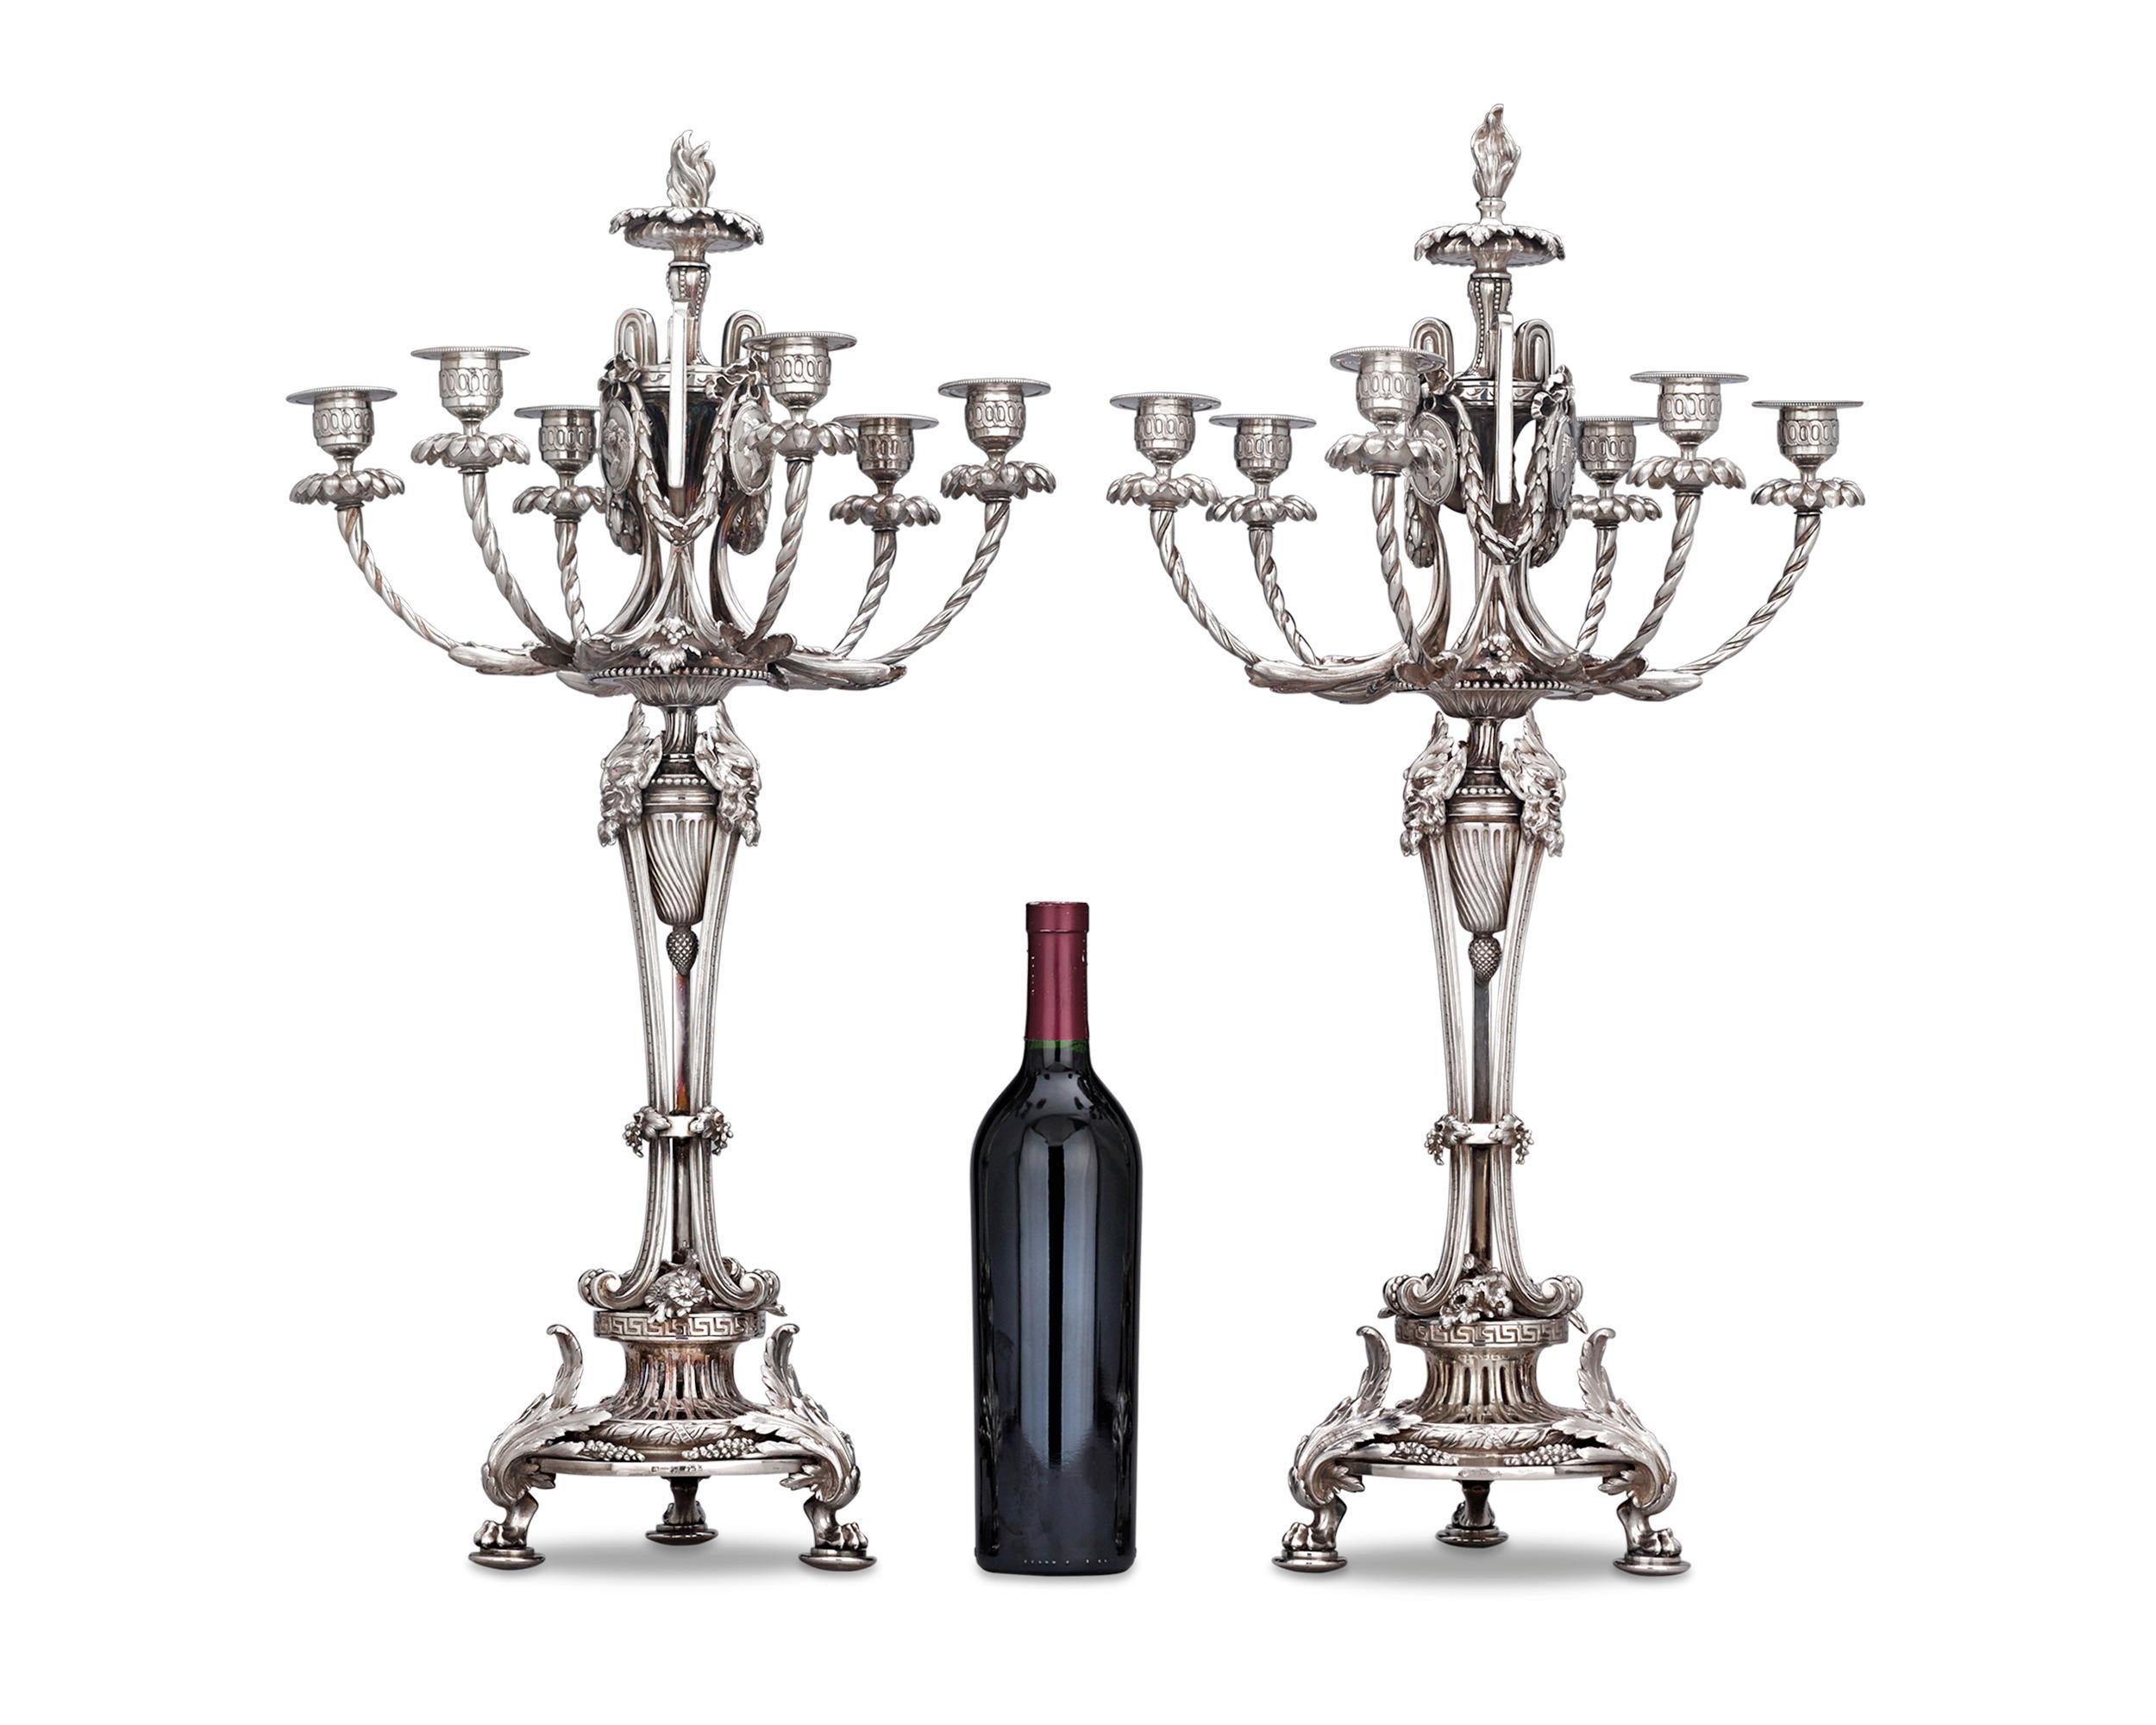 This extraordinary pair of silver plate six-light candelabra was crafted by the celebrated luxury silver manufacturers Christofle. Executed in the neoclassical style, these candelabra exemplify the firm's unfailing eye for timeless design and